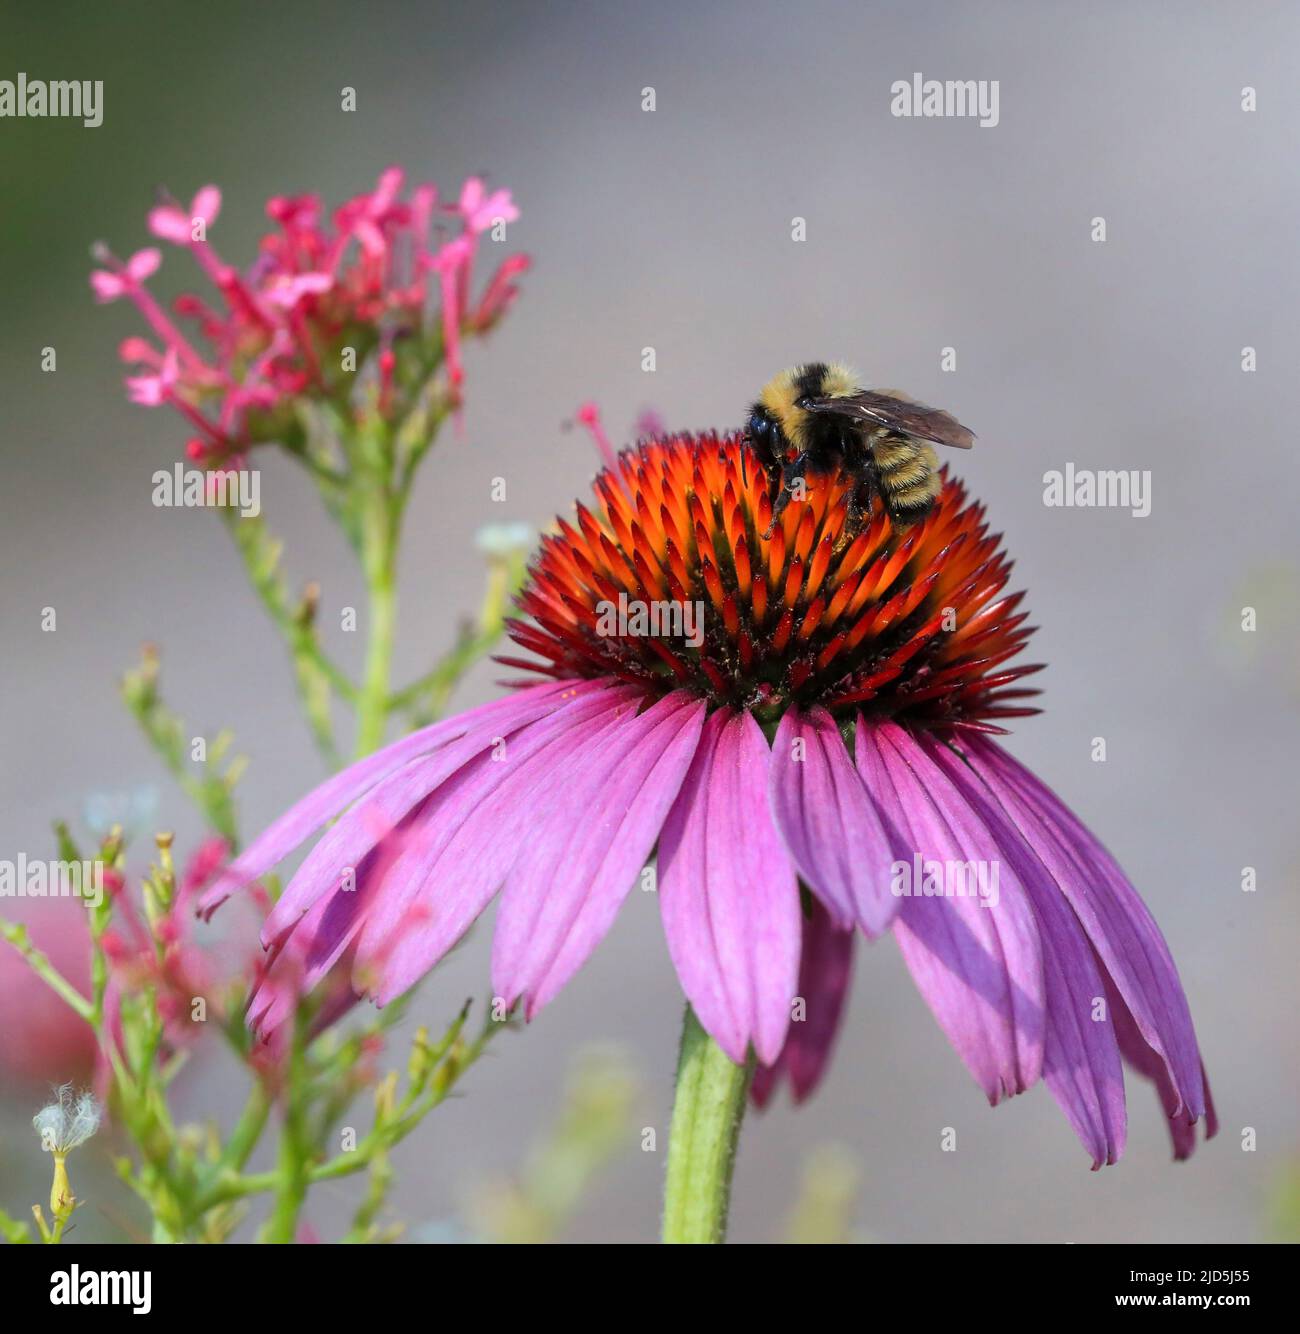 A Bumblebee atop a pink purple Echinacea flower in a garden setting, with a natural light background. Stock Photo